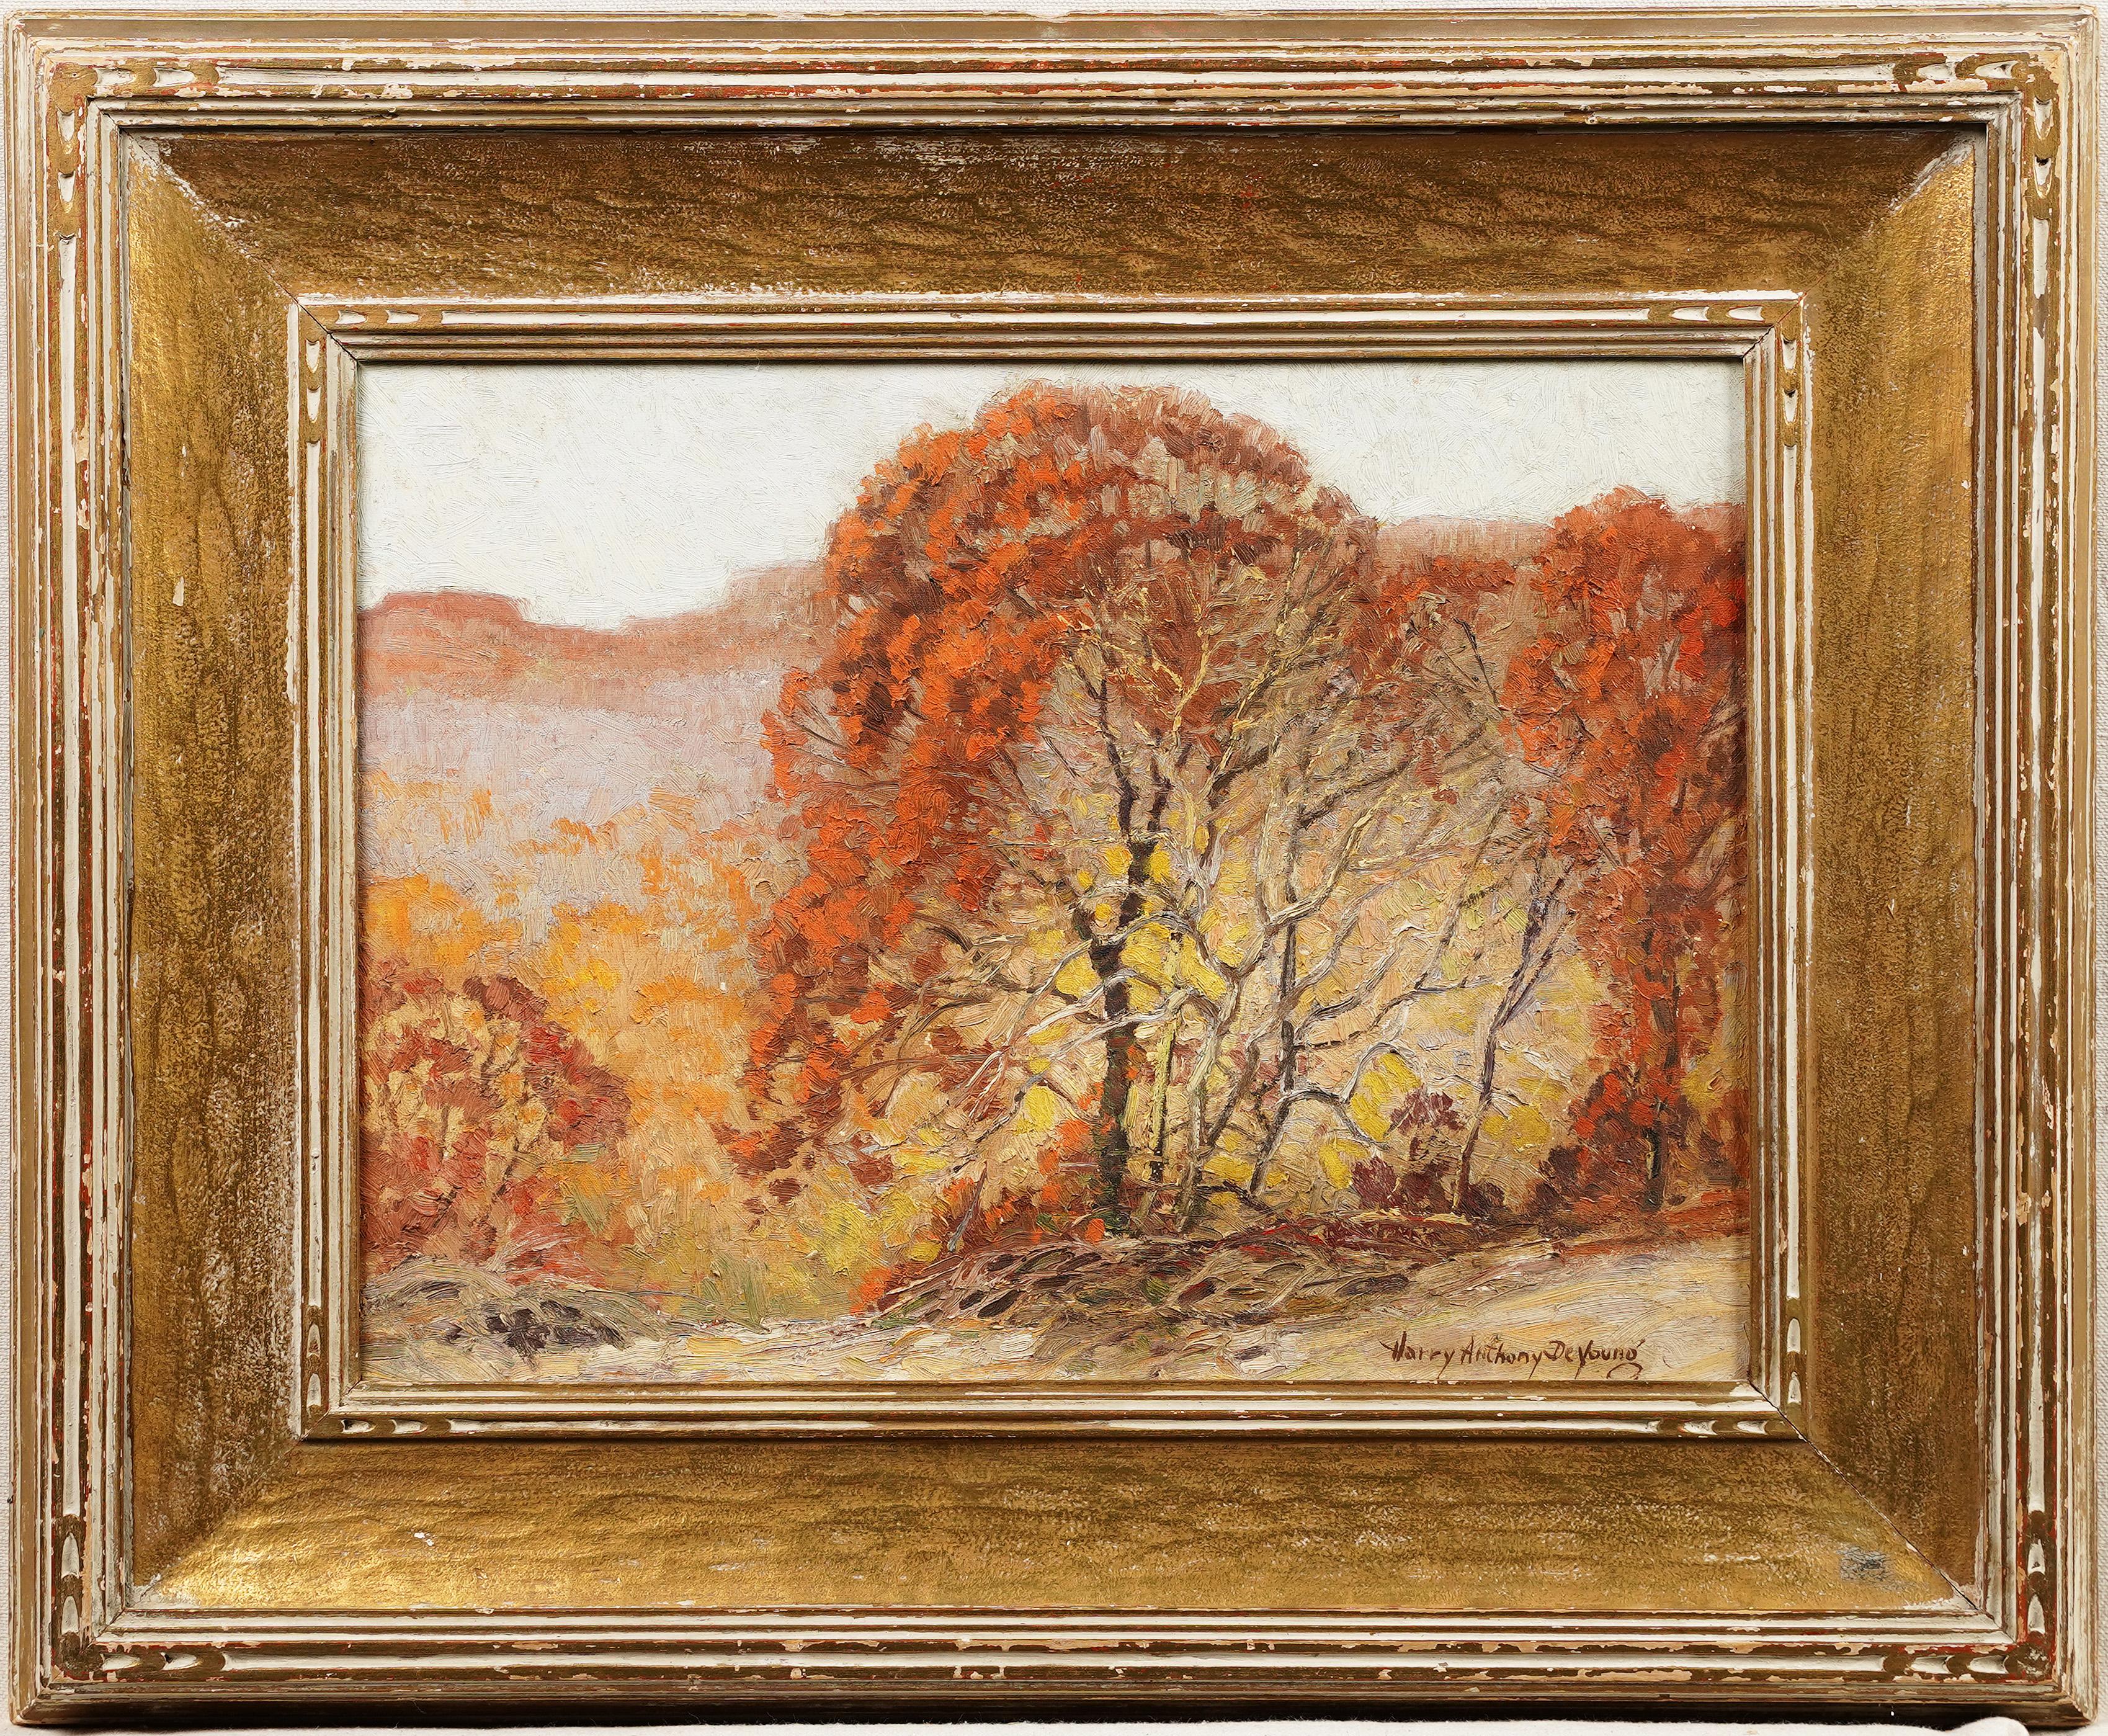 Harry Anthony De Young (1893 - 1956)  Landscape Painting -  Antique American Texas Impressionist Fall Landscape Signed Framed Oil Painting